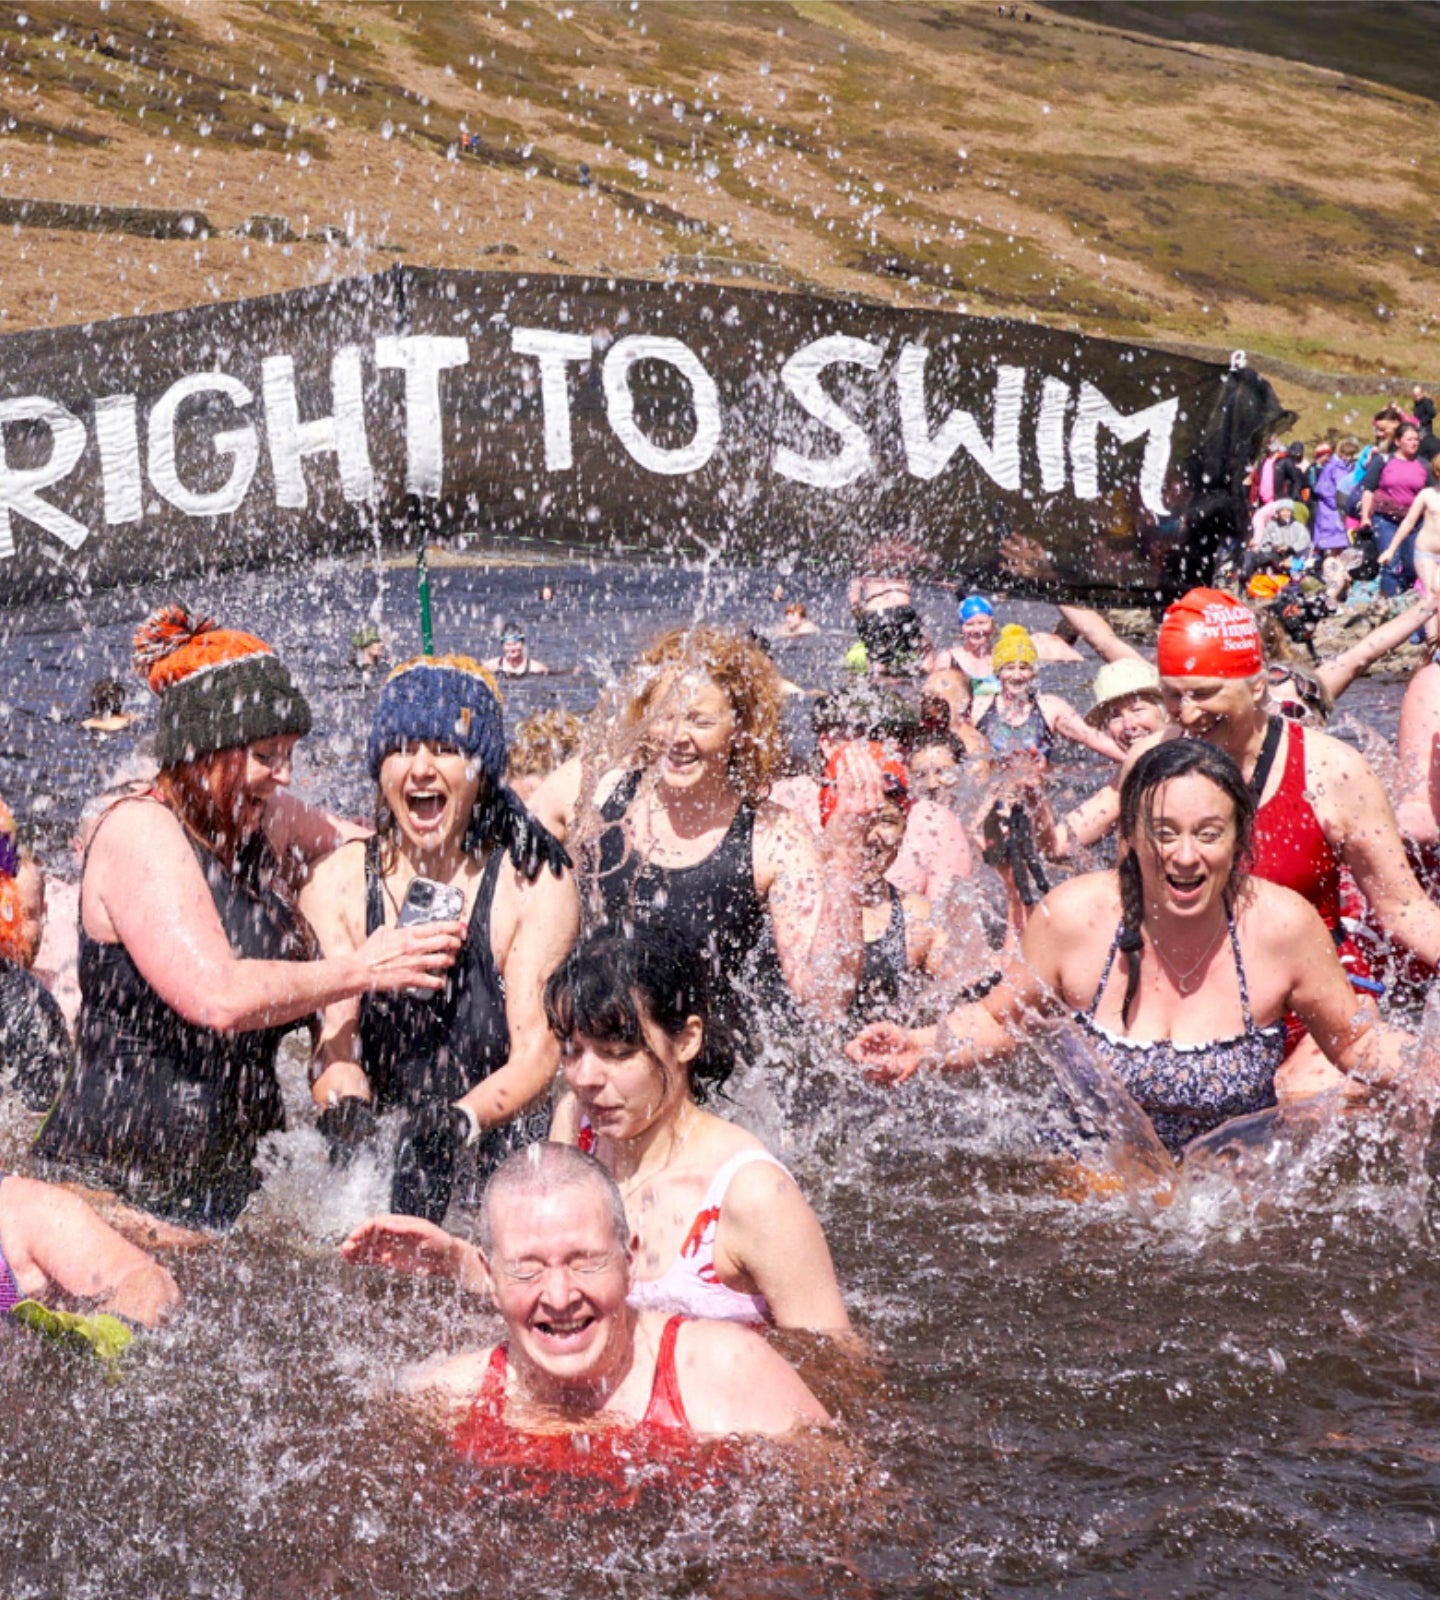 Kinder Trespass: Supporting the right to Swim